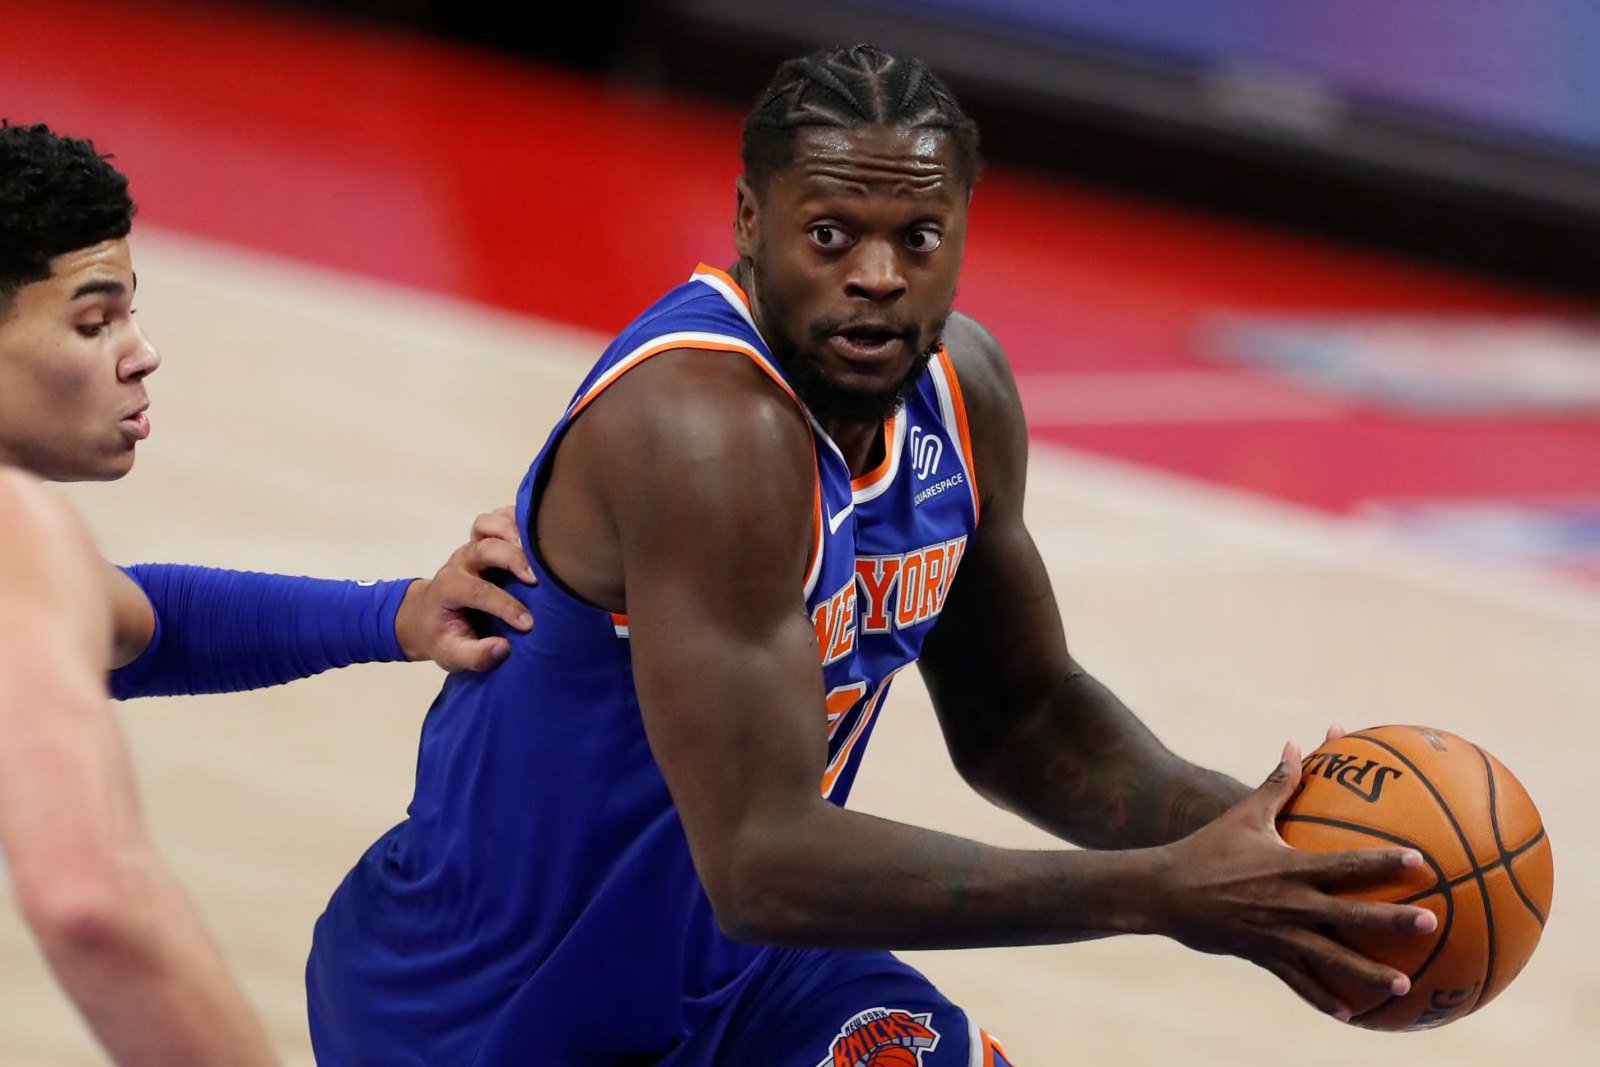 NY Knicks all-star Julius Randle launches #30 for 3! campaign – Bronx Times